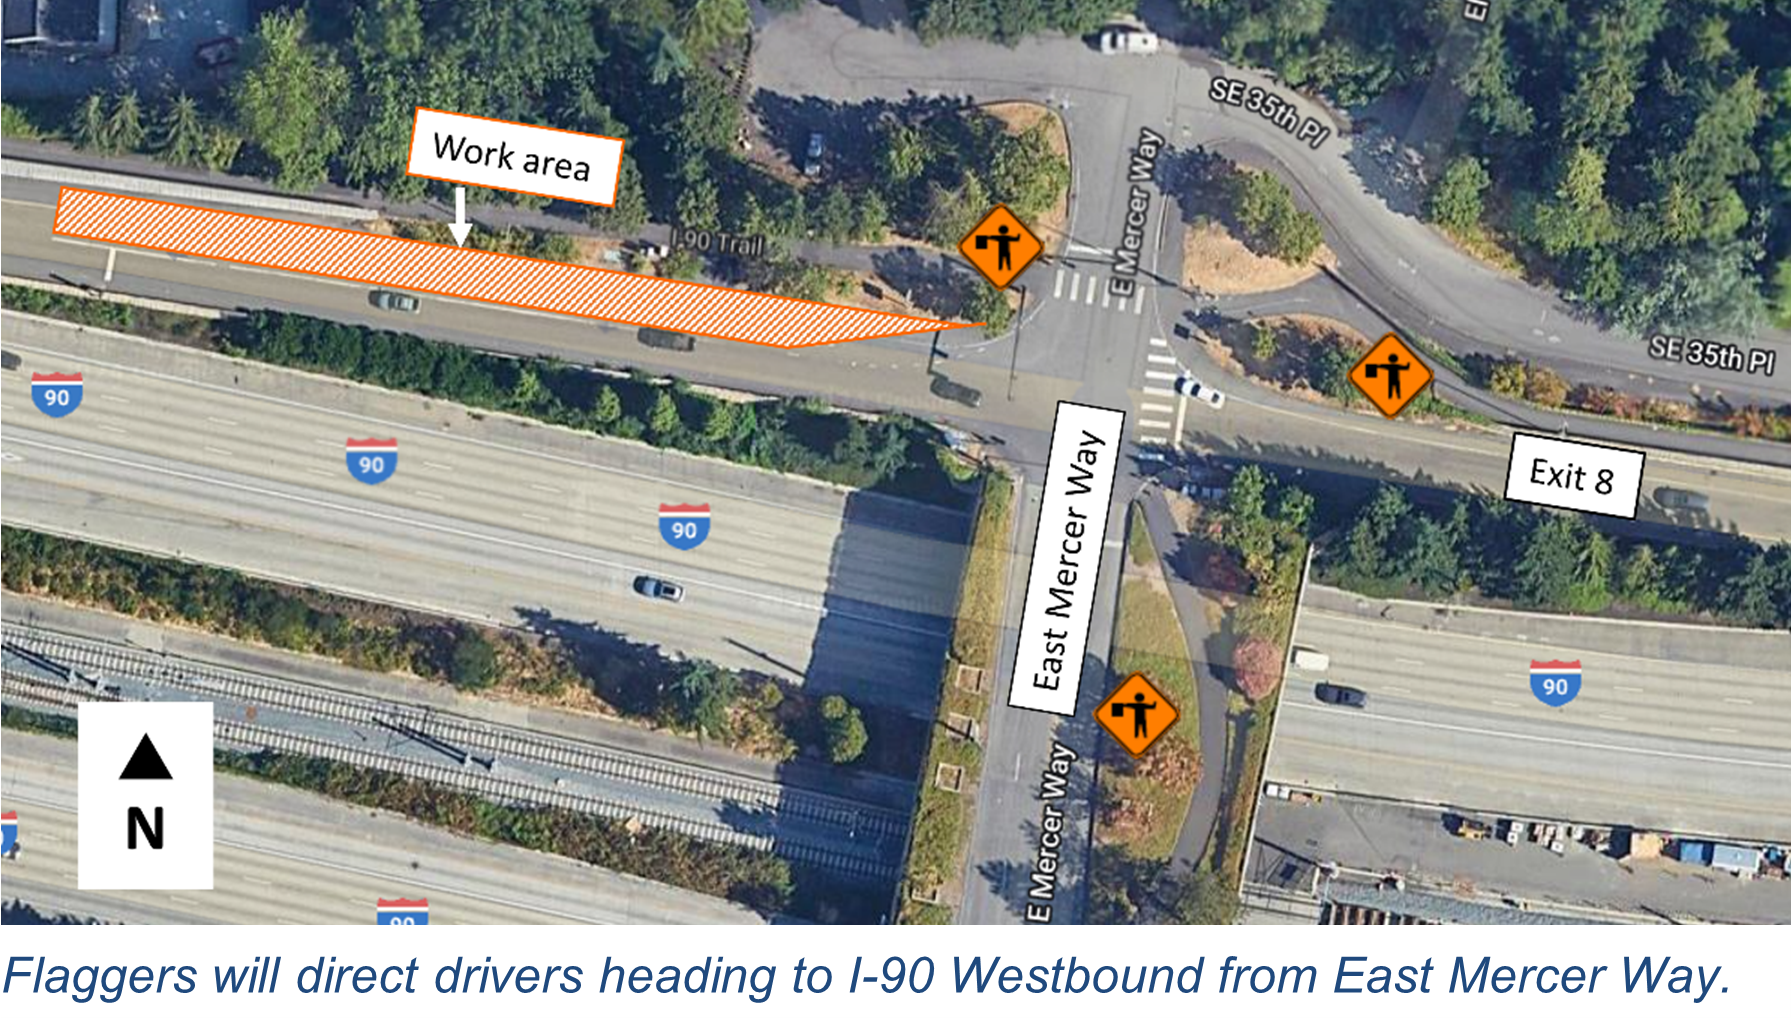 Flaggers will direct drivers heading to I-90 Westbound from East Mercer Way